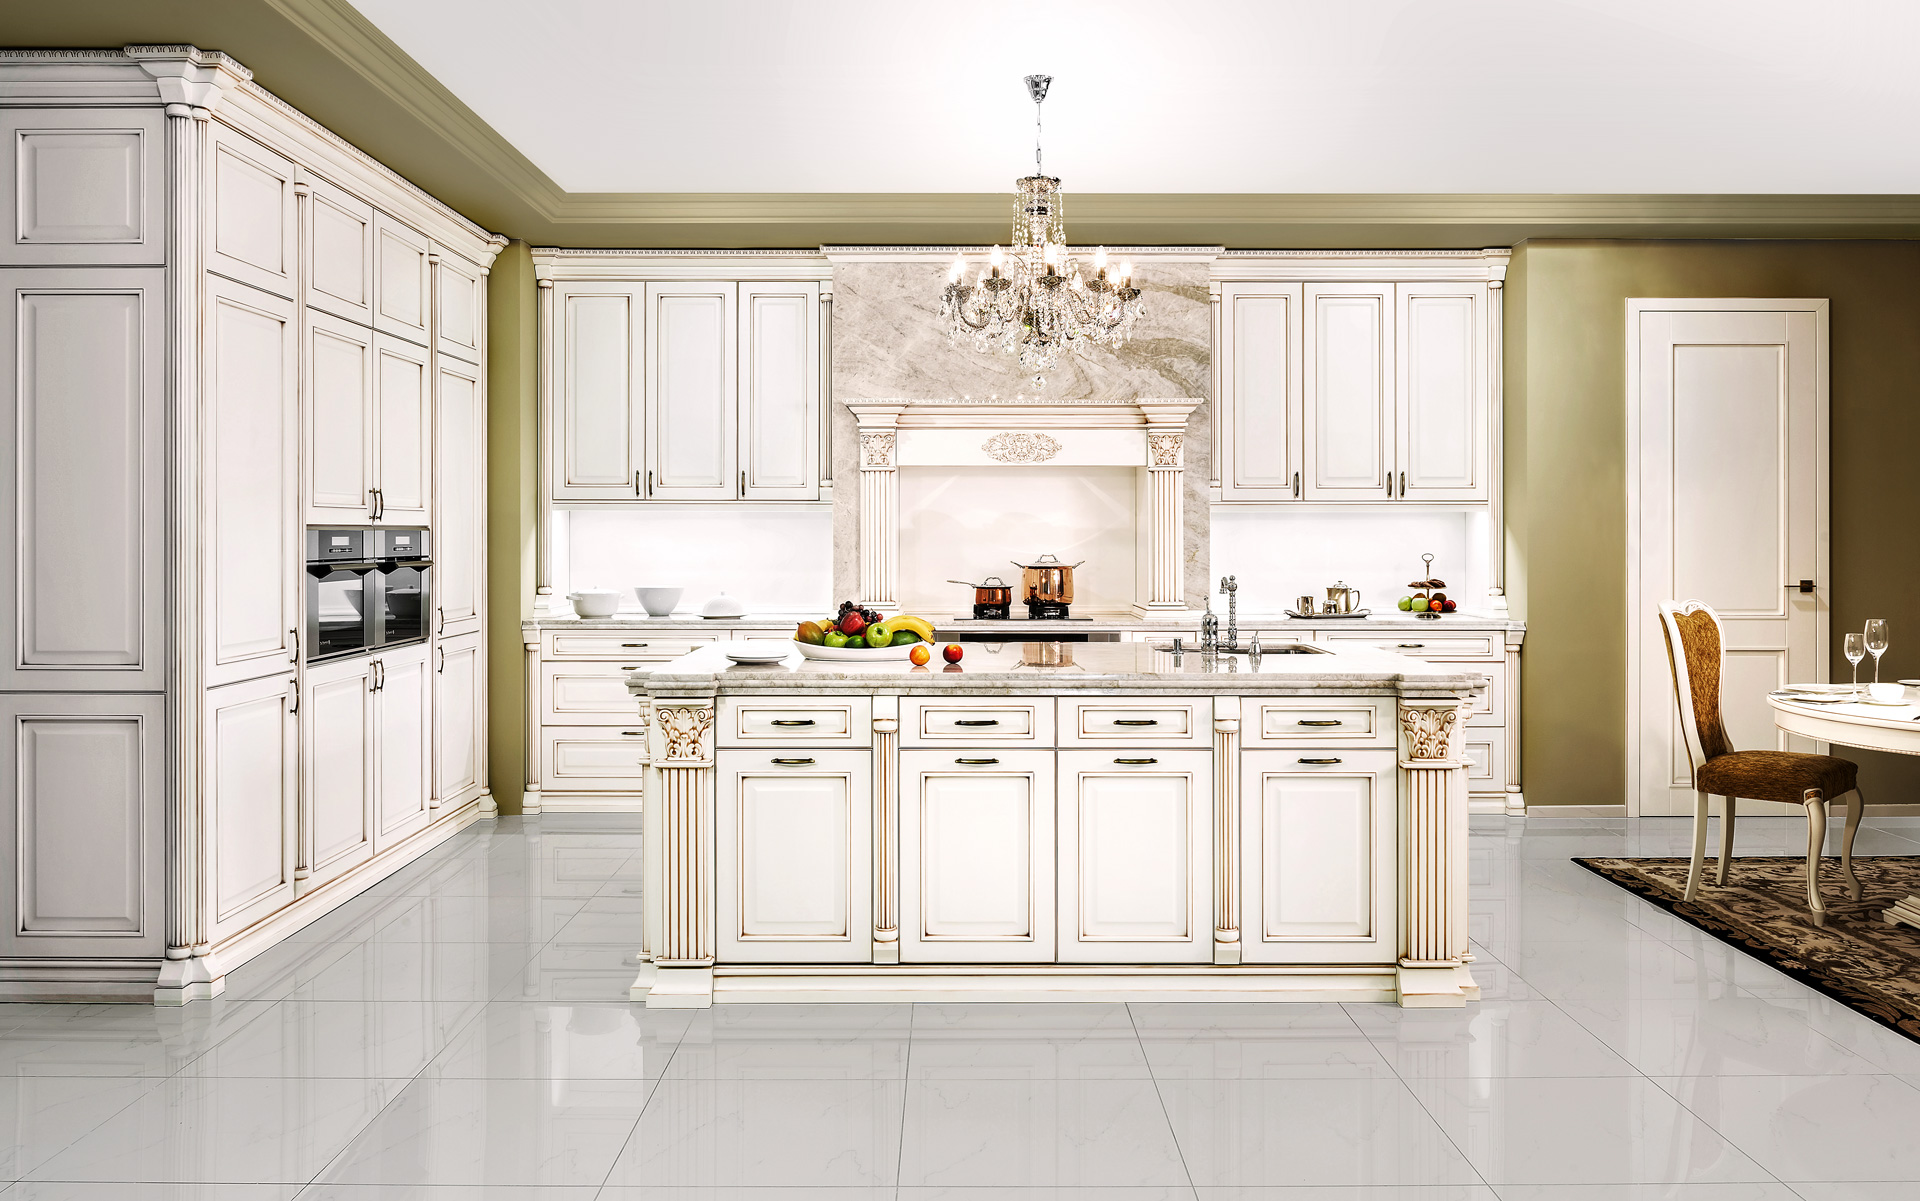 The Most Royal Kitchen Design And Decorations | Orchidlagoon.com ...